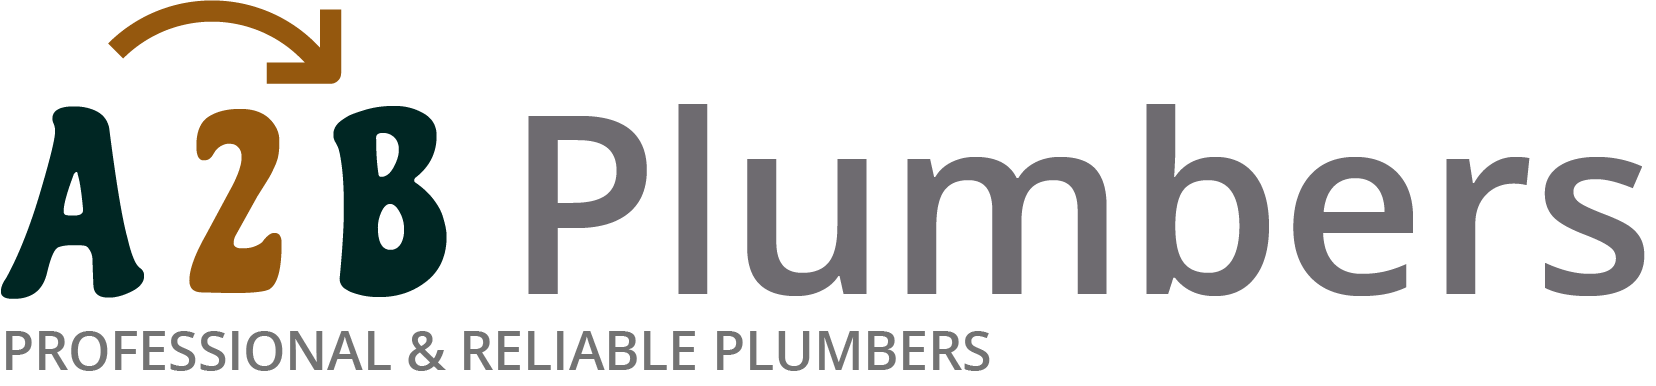 If you need a boiler installed, a radiator repaired or a leaking tap fixed, call us now - we provide services for properties in Sittingbourne and the local area.